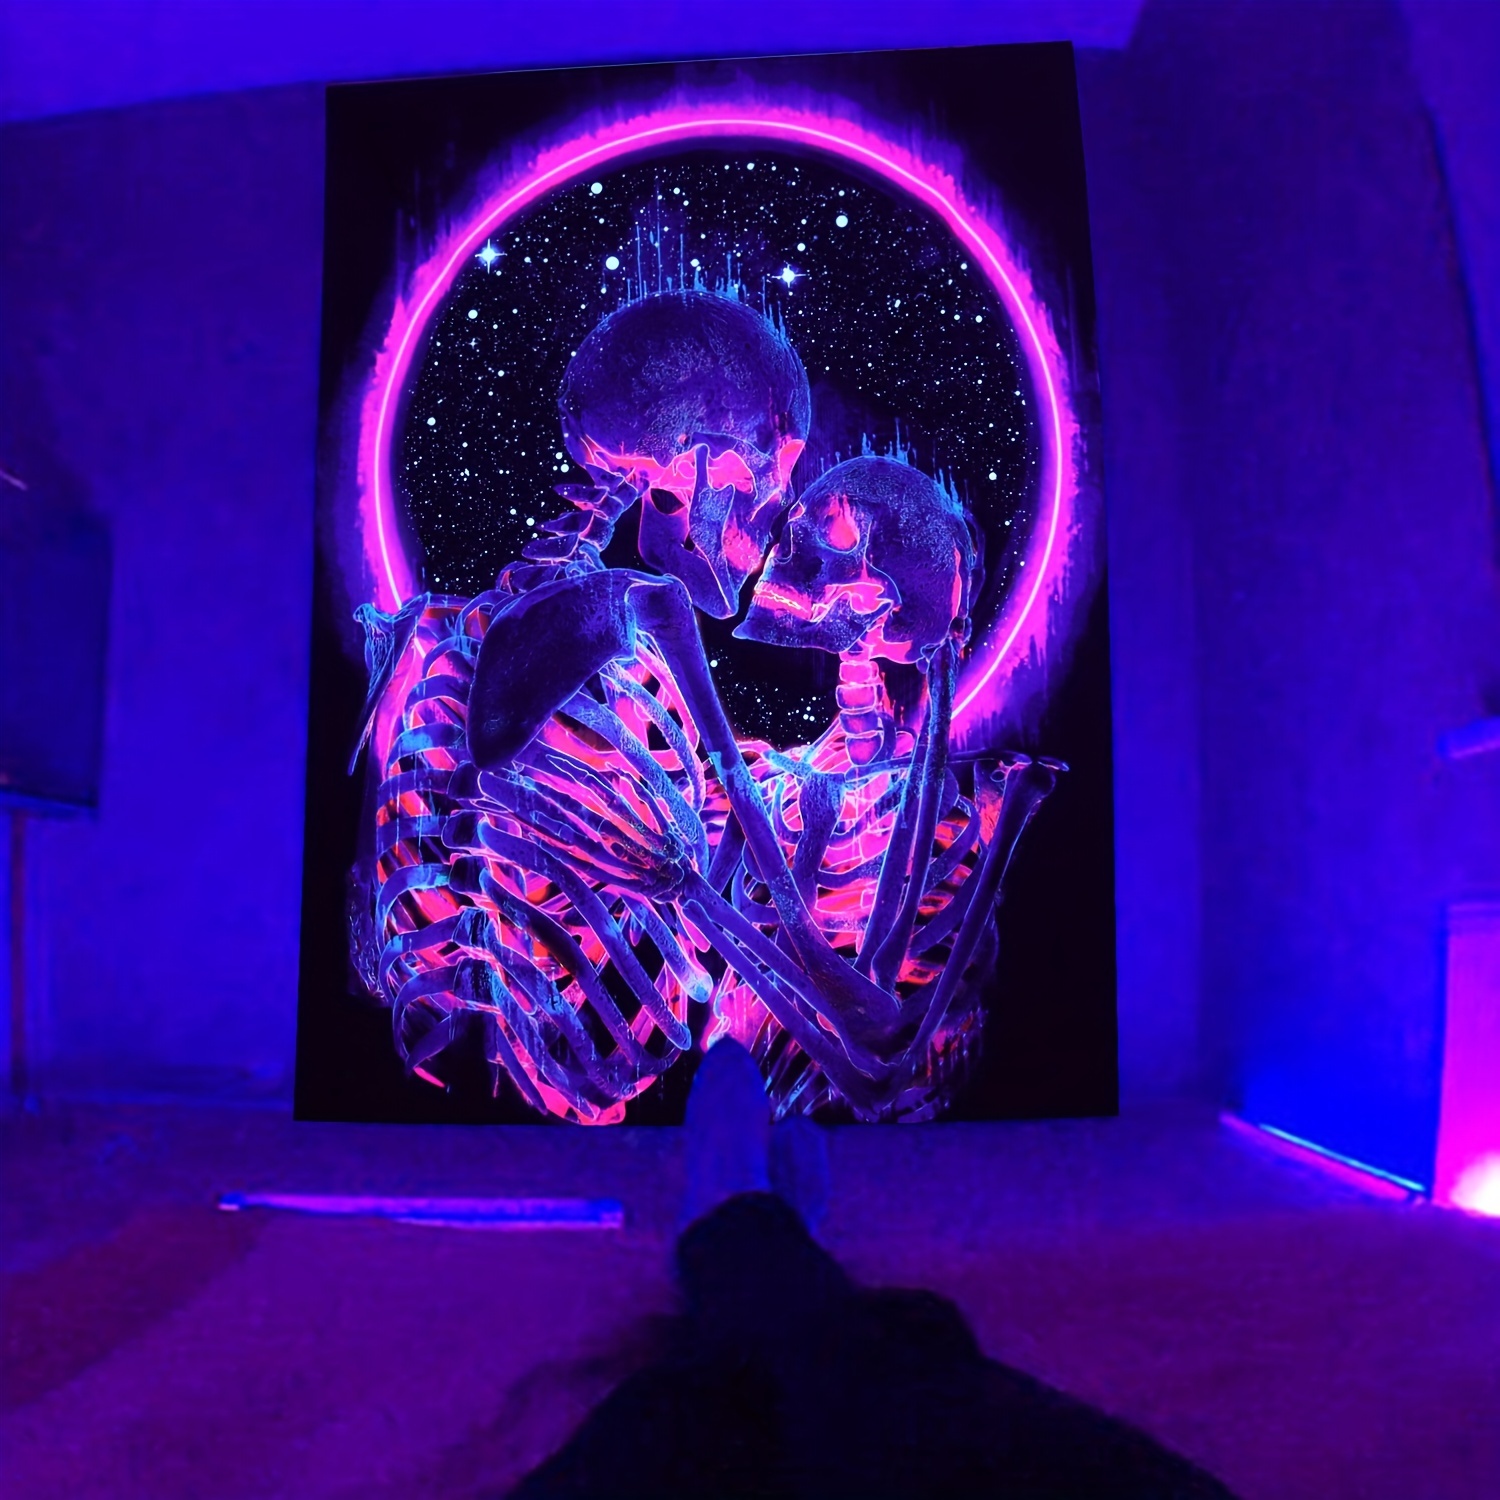 Glow In The Dark Skeleton Skull Tapestry: Add a Spooky Touch to Your Home Decor!